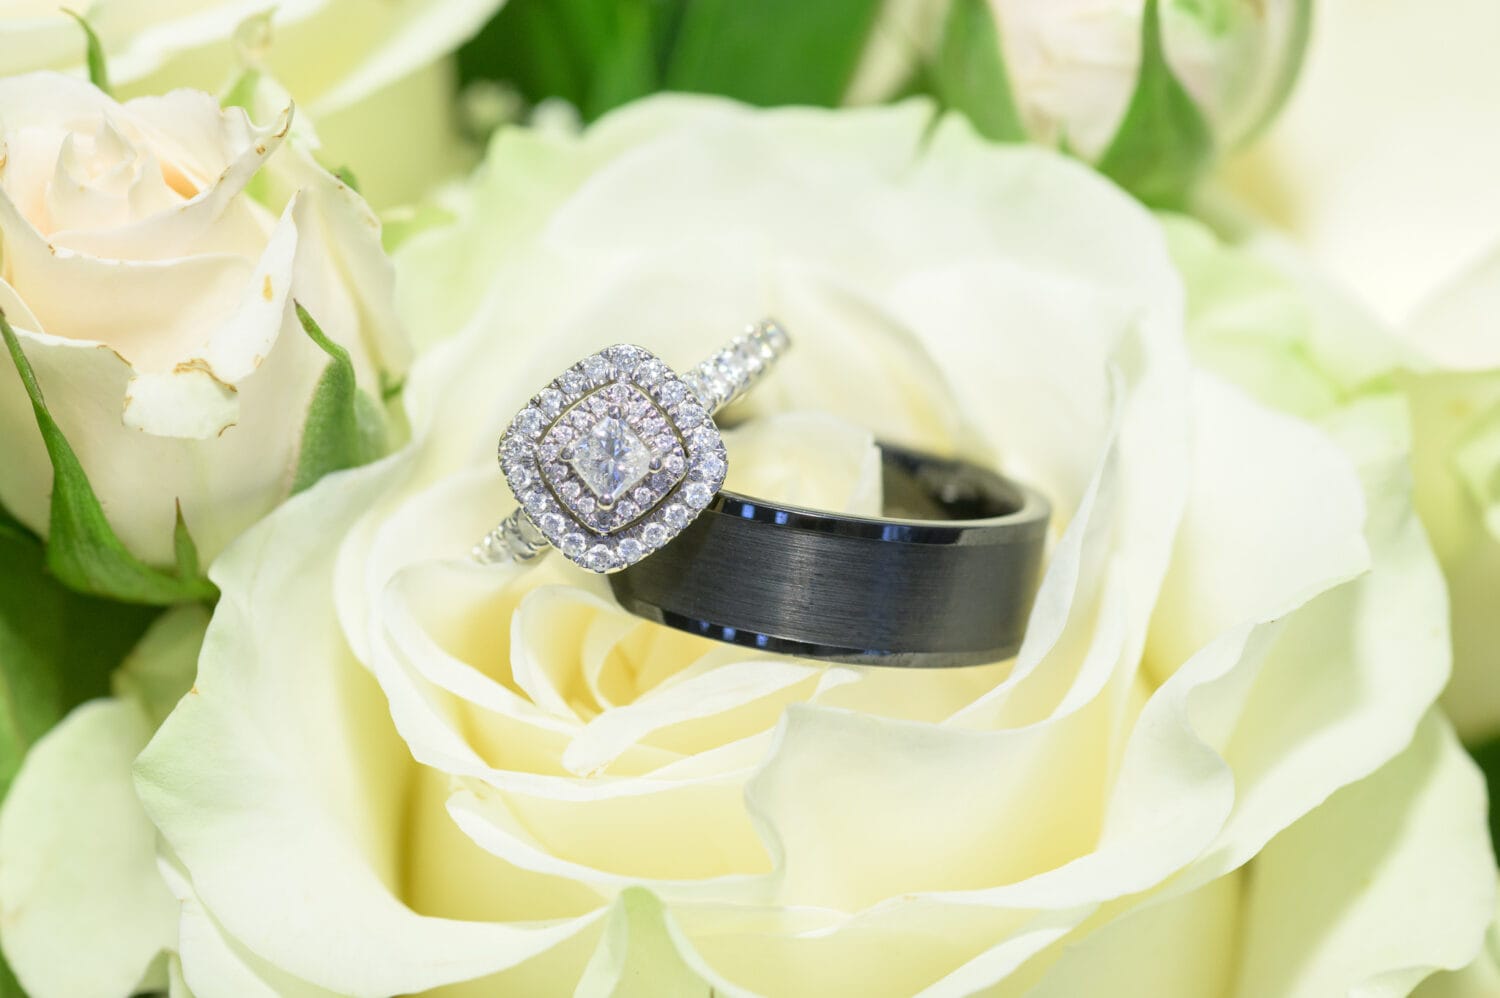 Rings on flowers - The Venue at White Oaks Farm